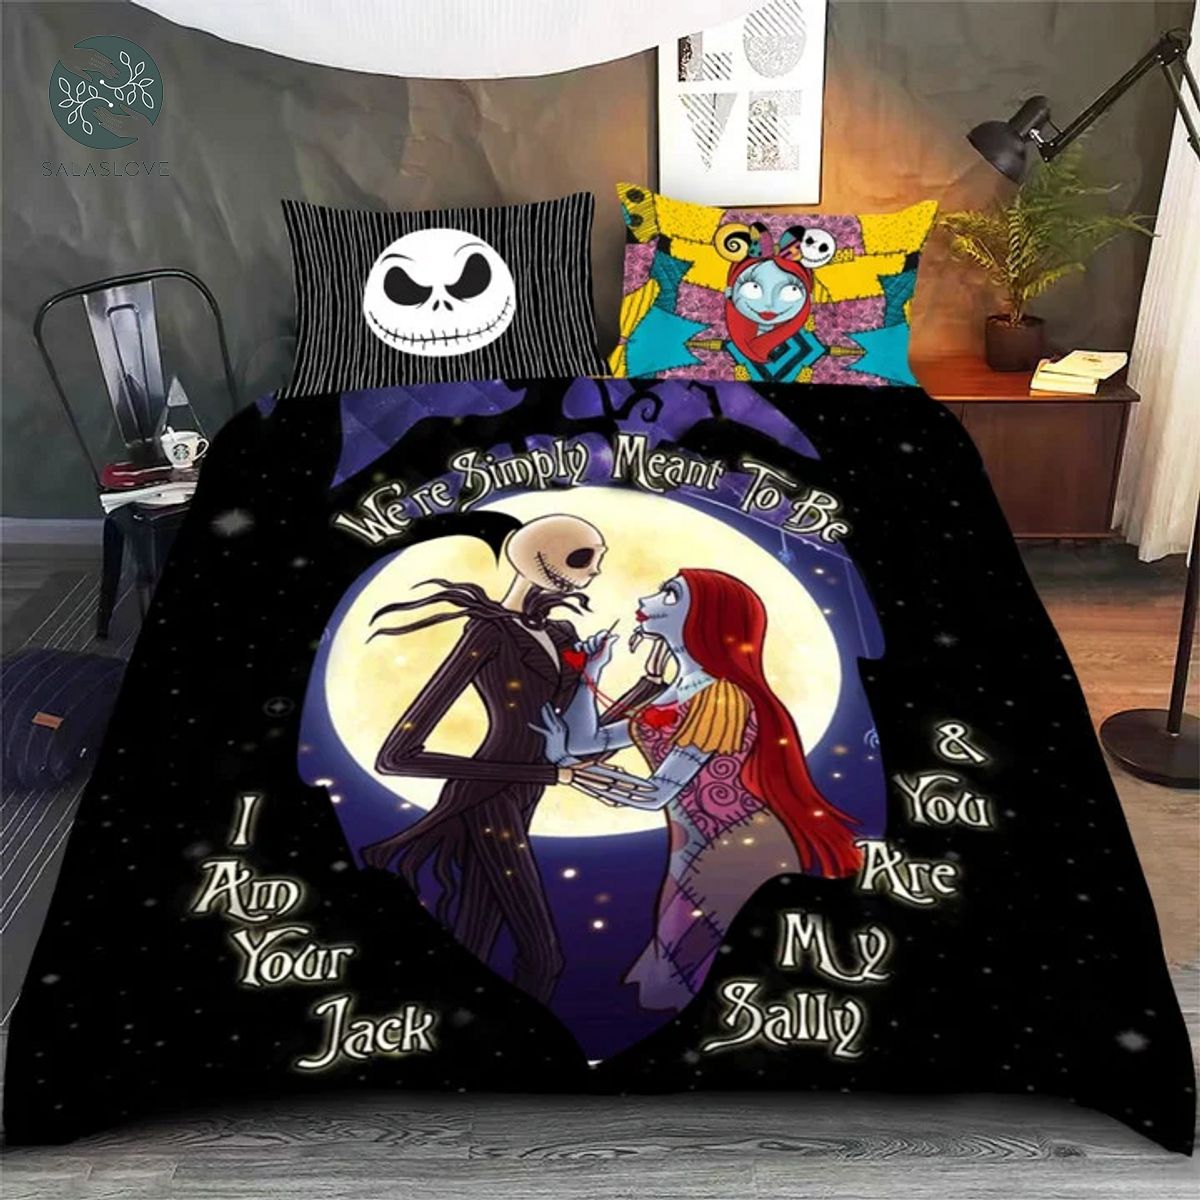 WE'RE SIMPLY MEANT TO BE JACK & SALLY BEDDING SET